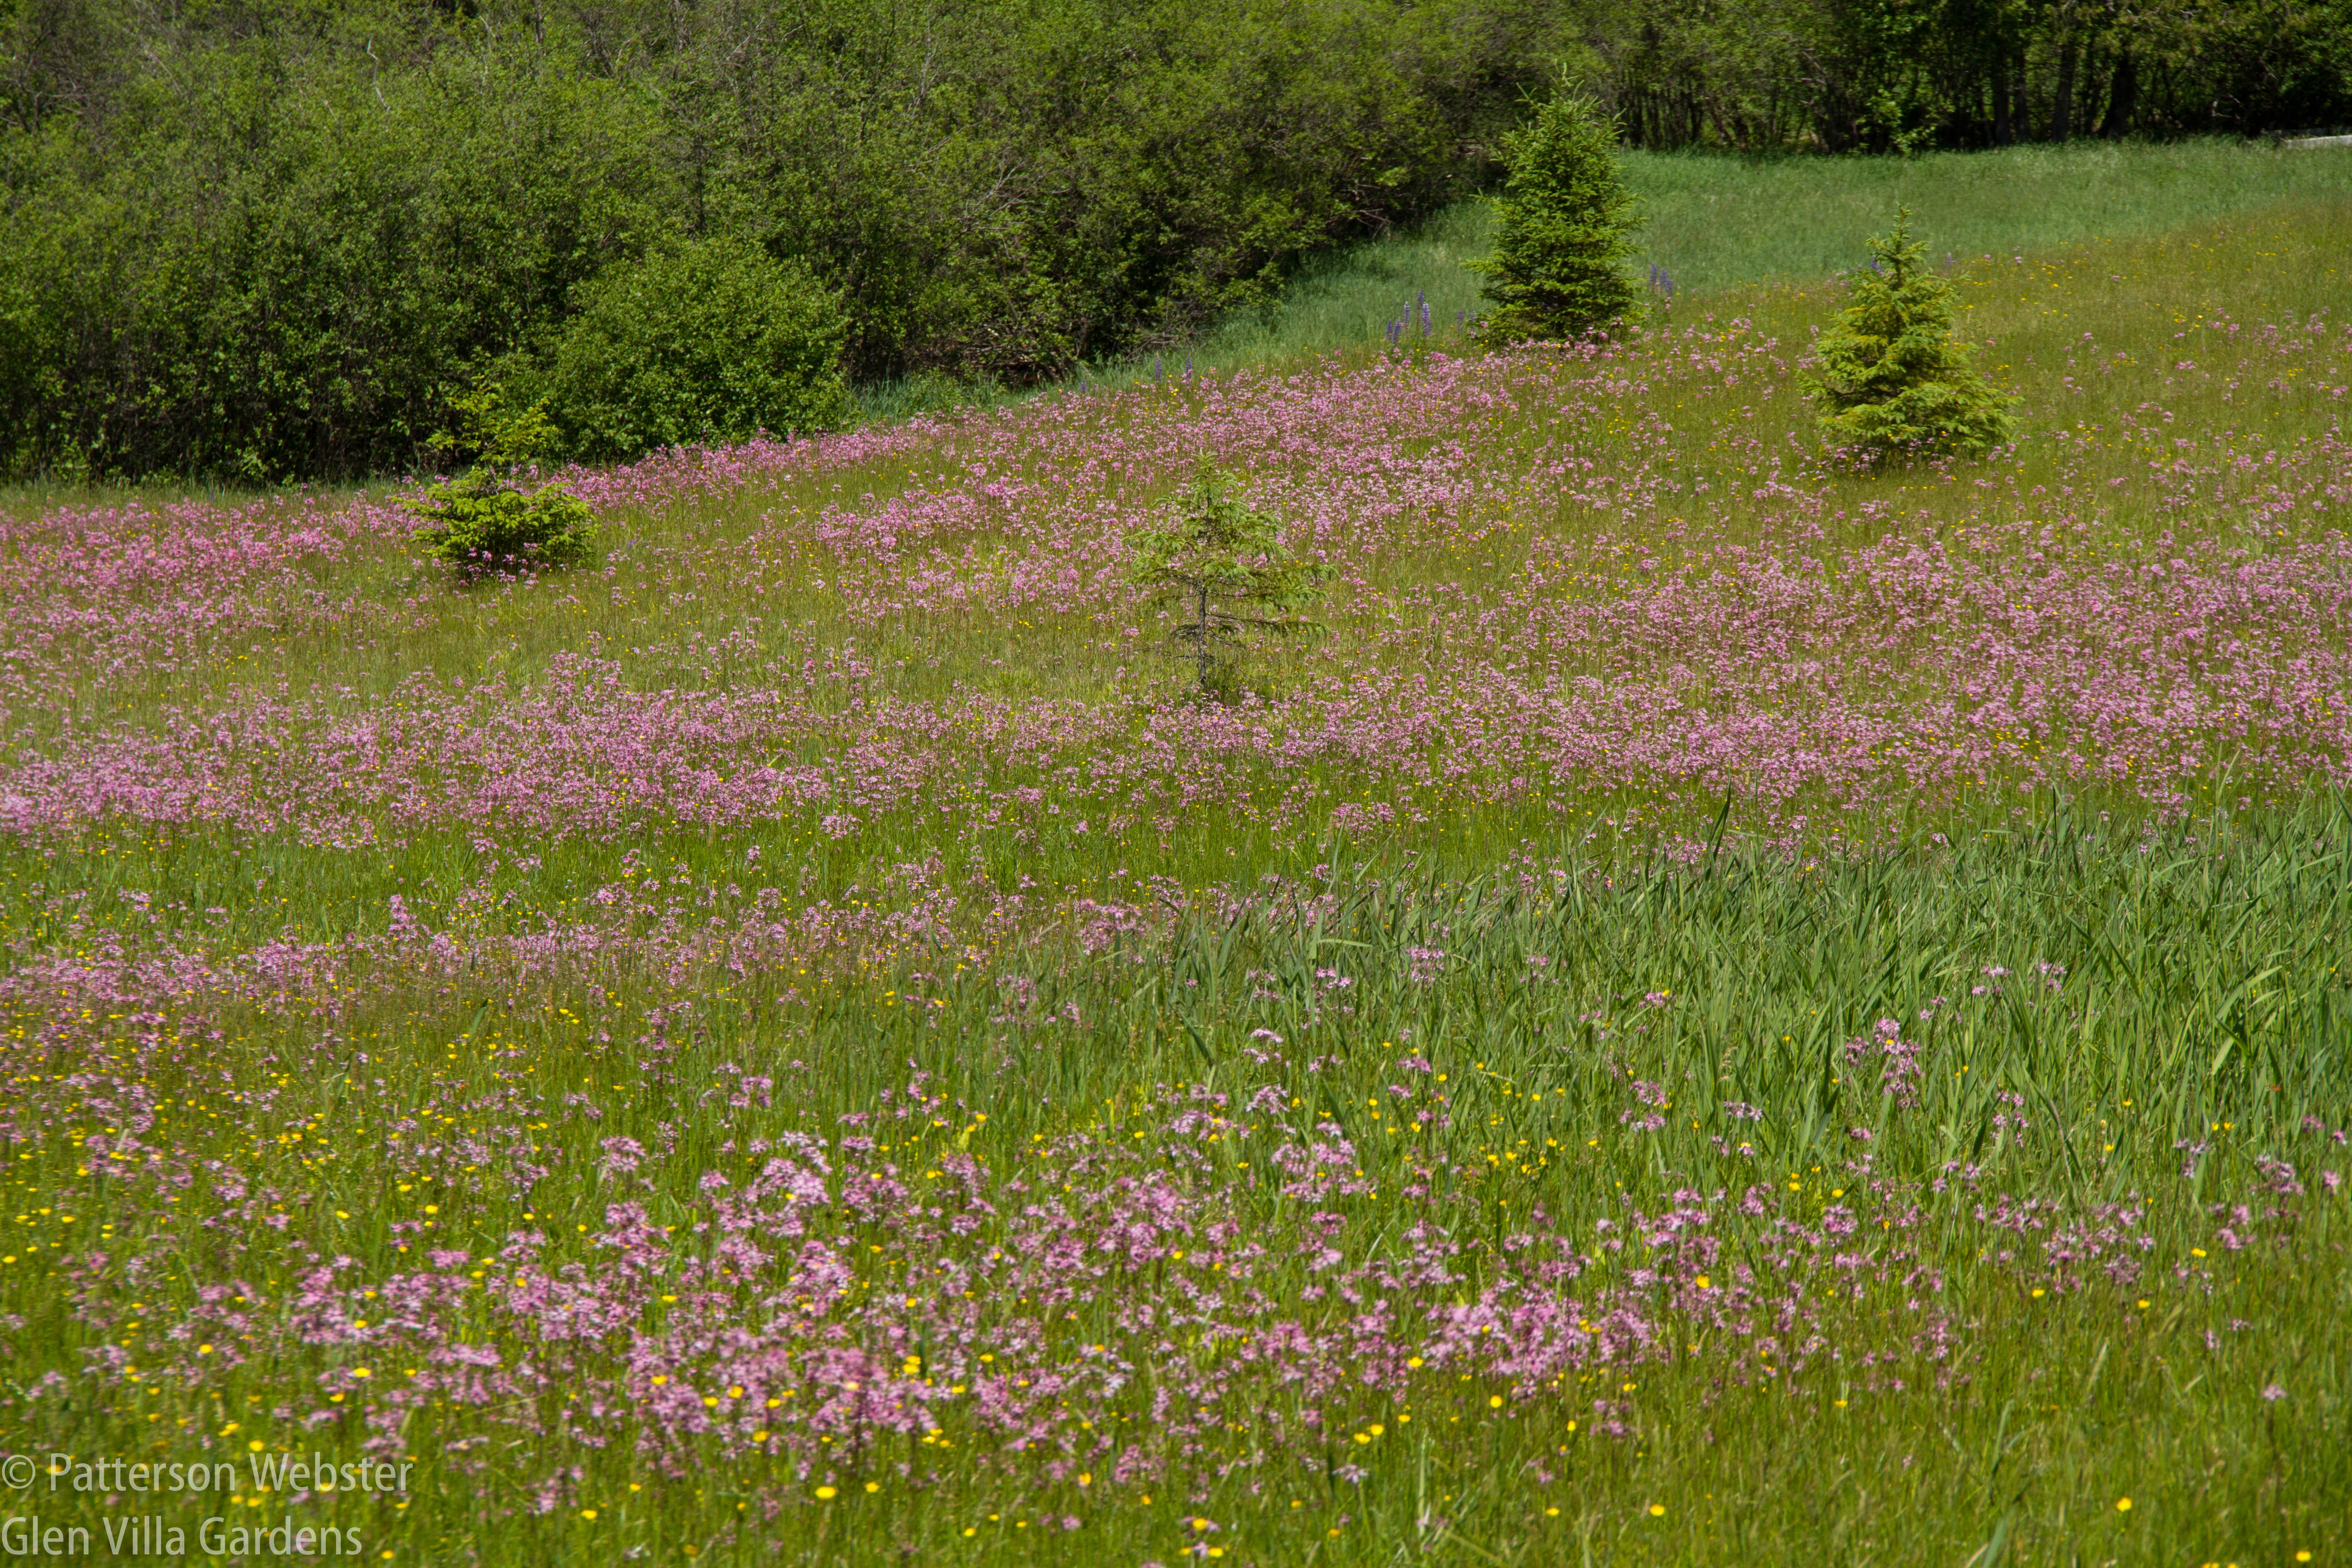 Ragged robin turns this field rosy pink.